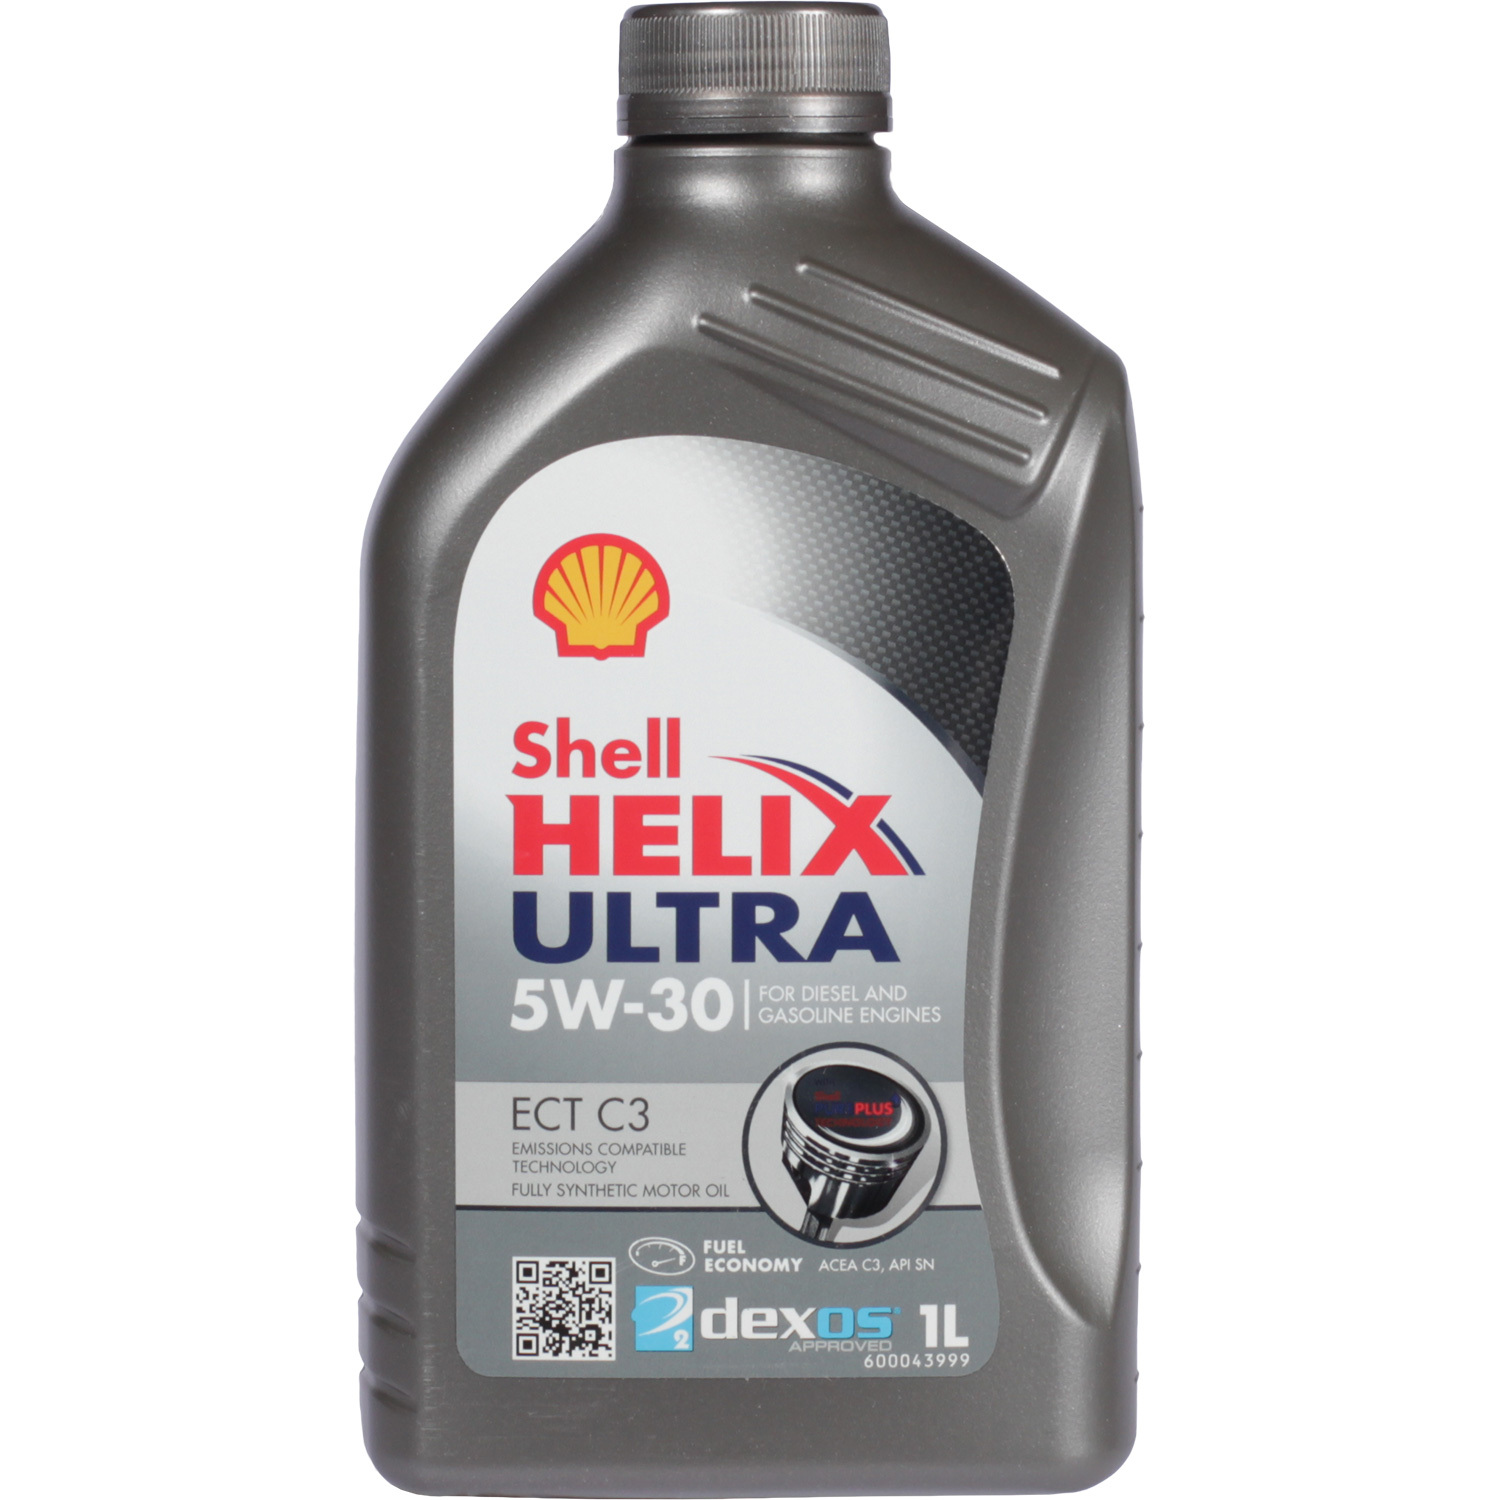 Shell Моторное масло Shell Helix Ultra ECT С3 5W-30, 1 л